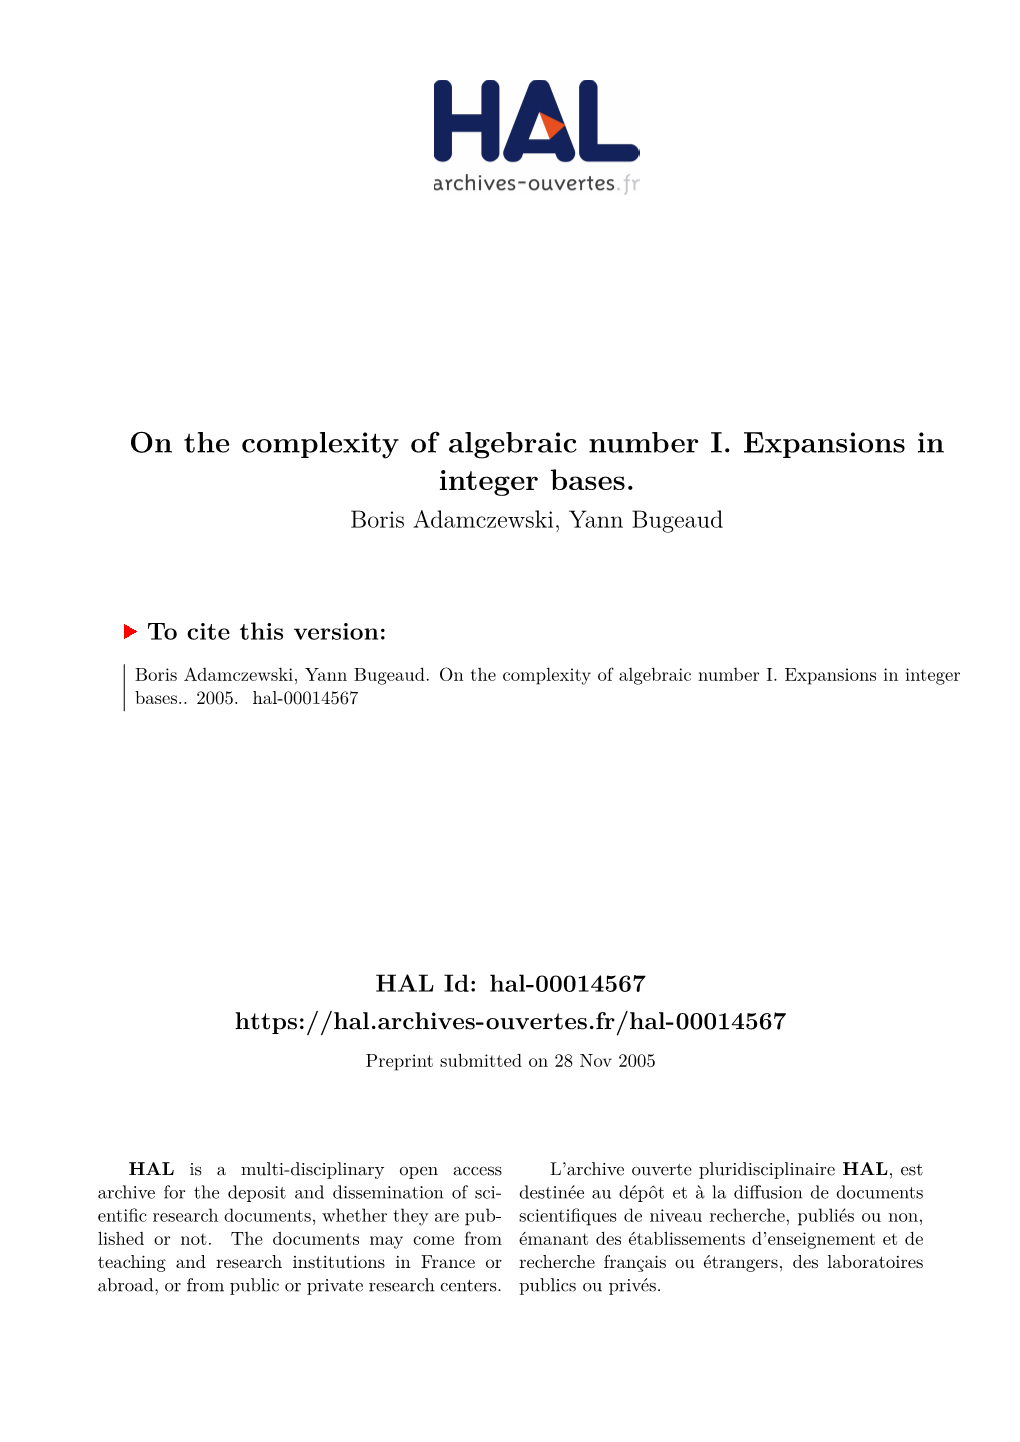 On the Complexity of Algebraic Number I. Expansions in Integer Bases. Boris Adamczewski, Yann Bugeaud